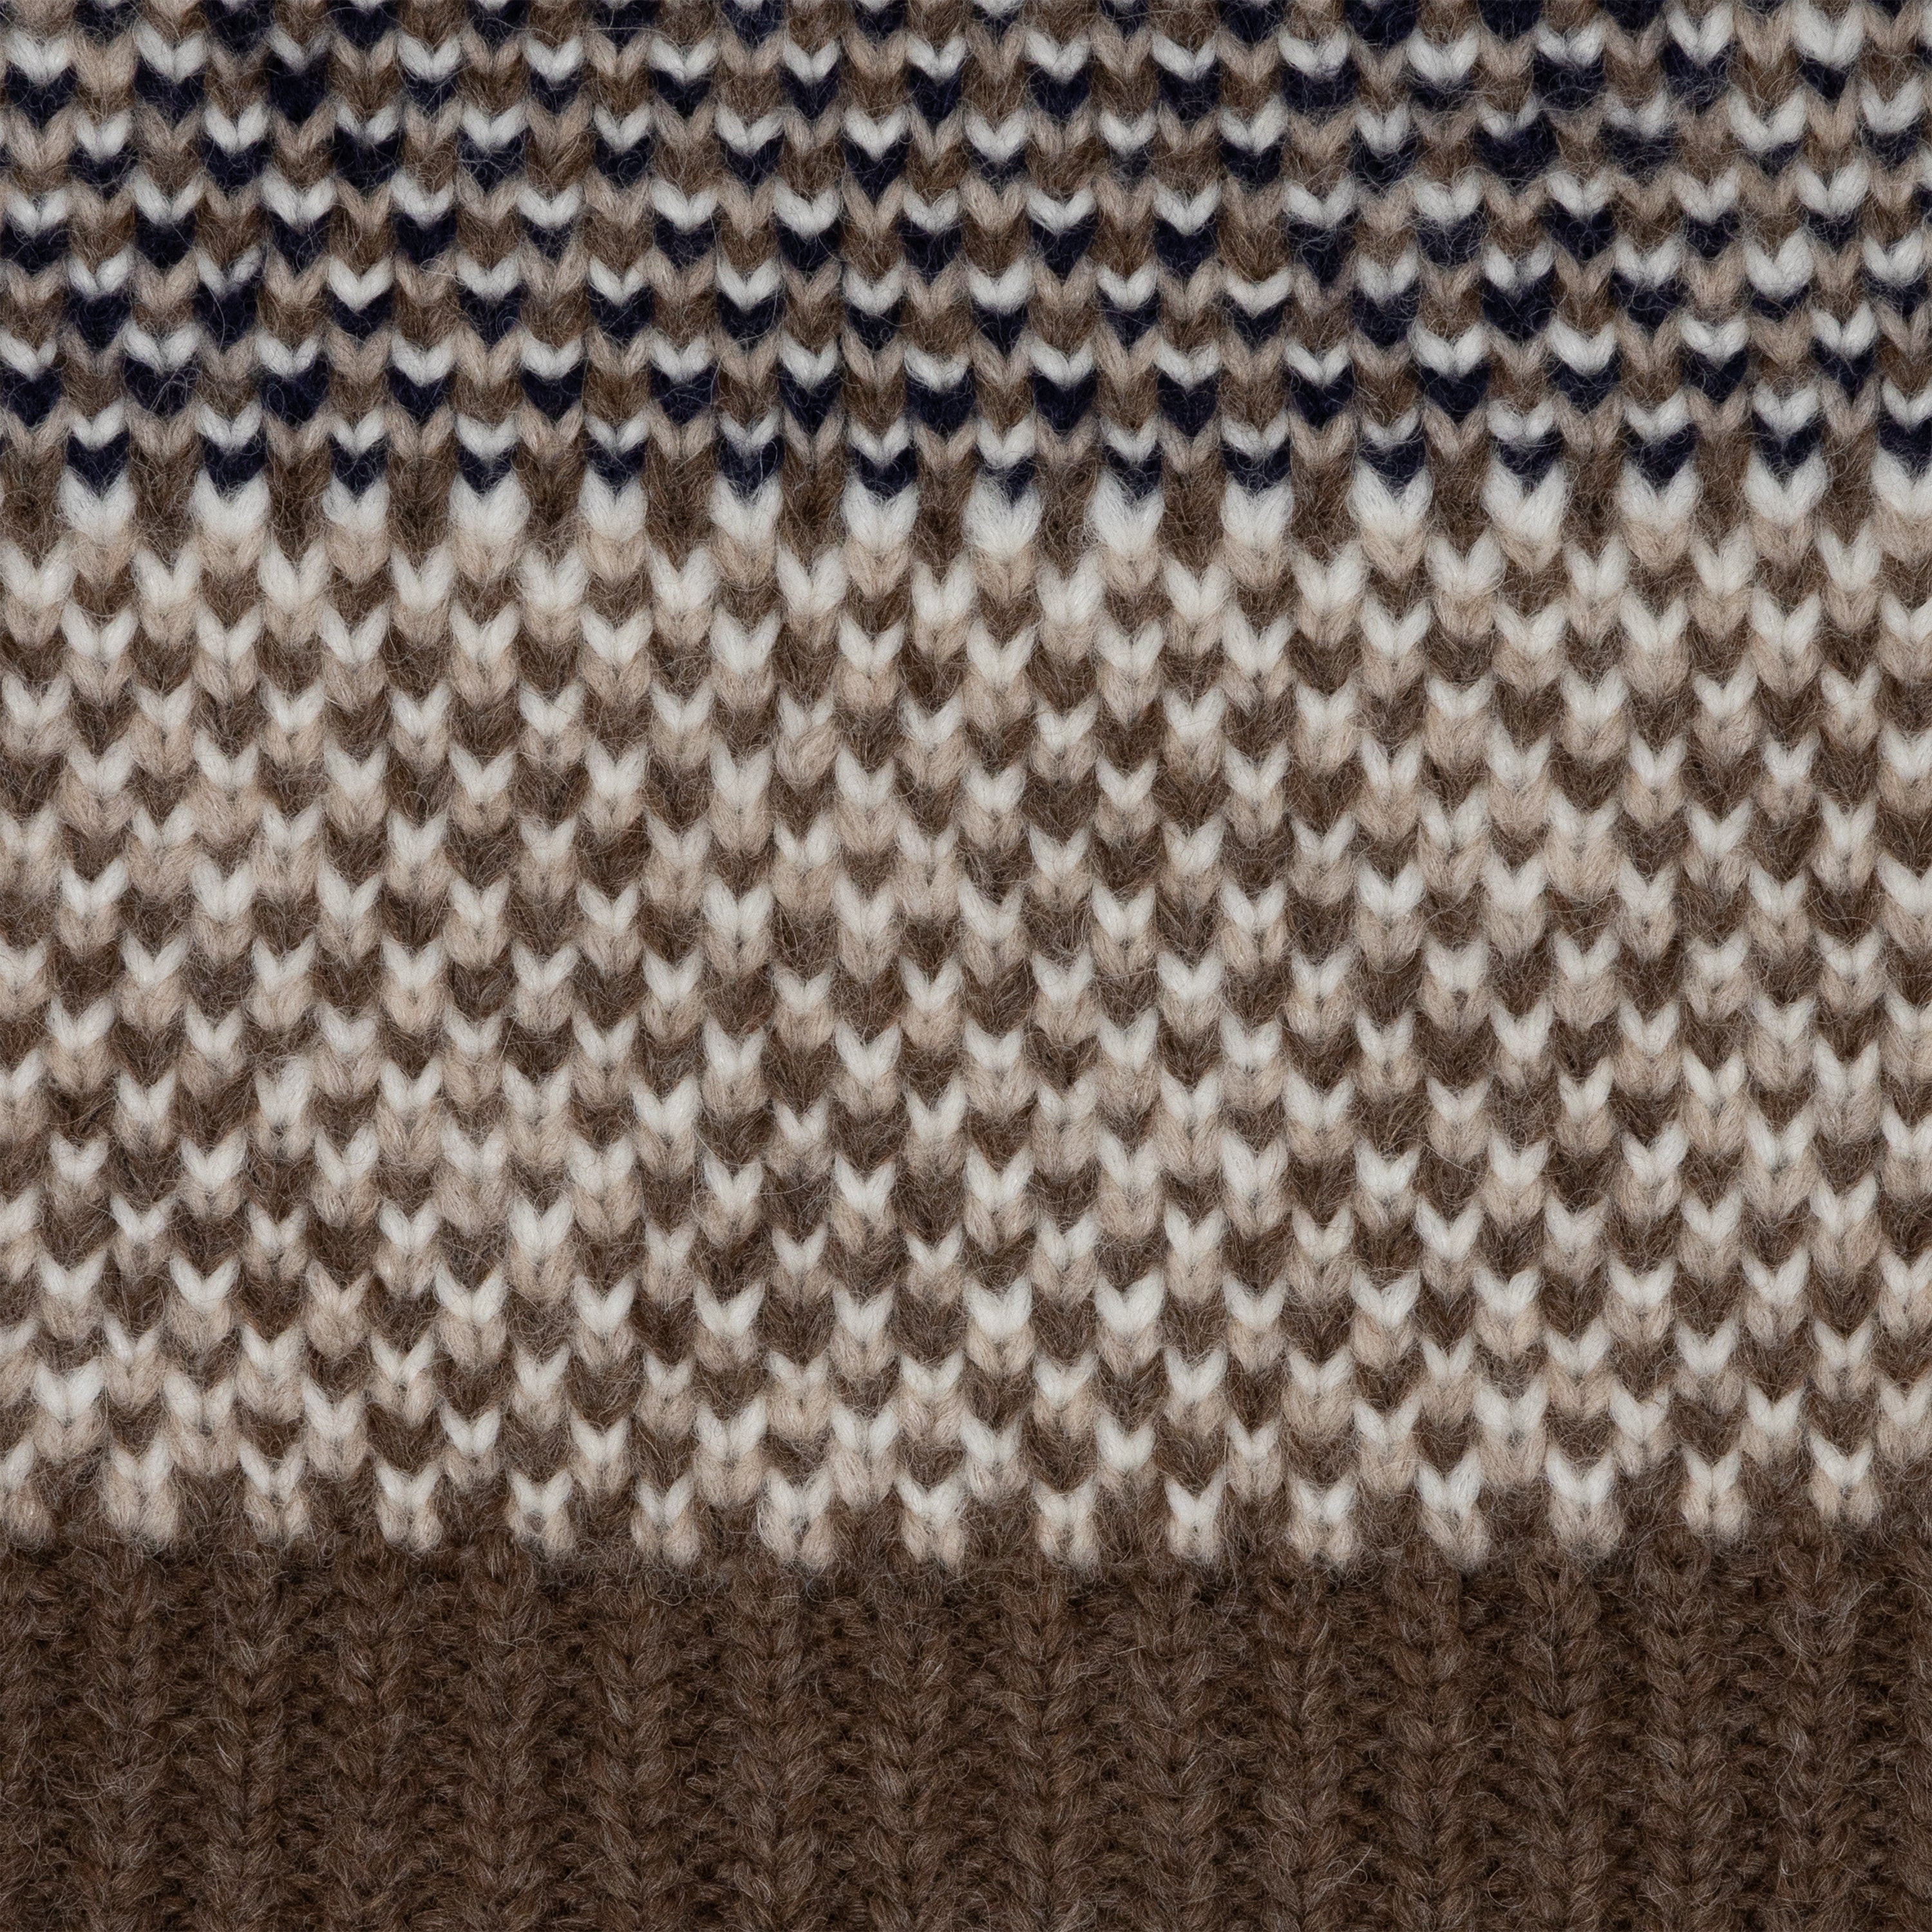 Baby Alpaca Knitted Sweater (Brown)